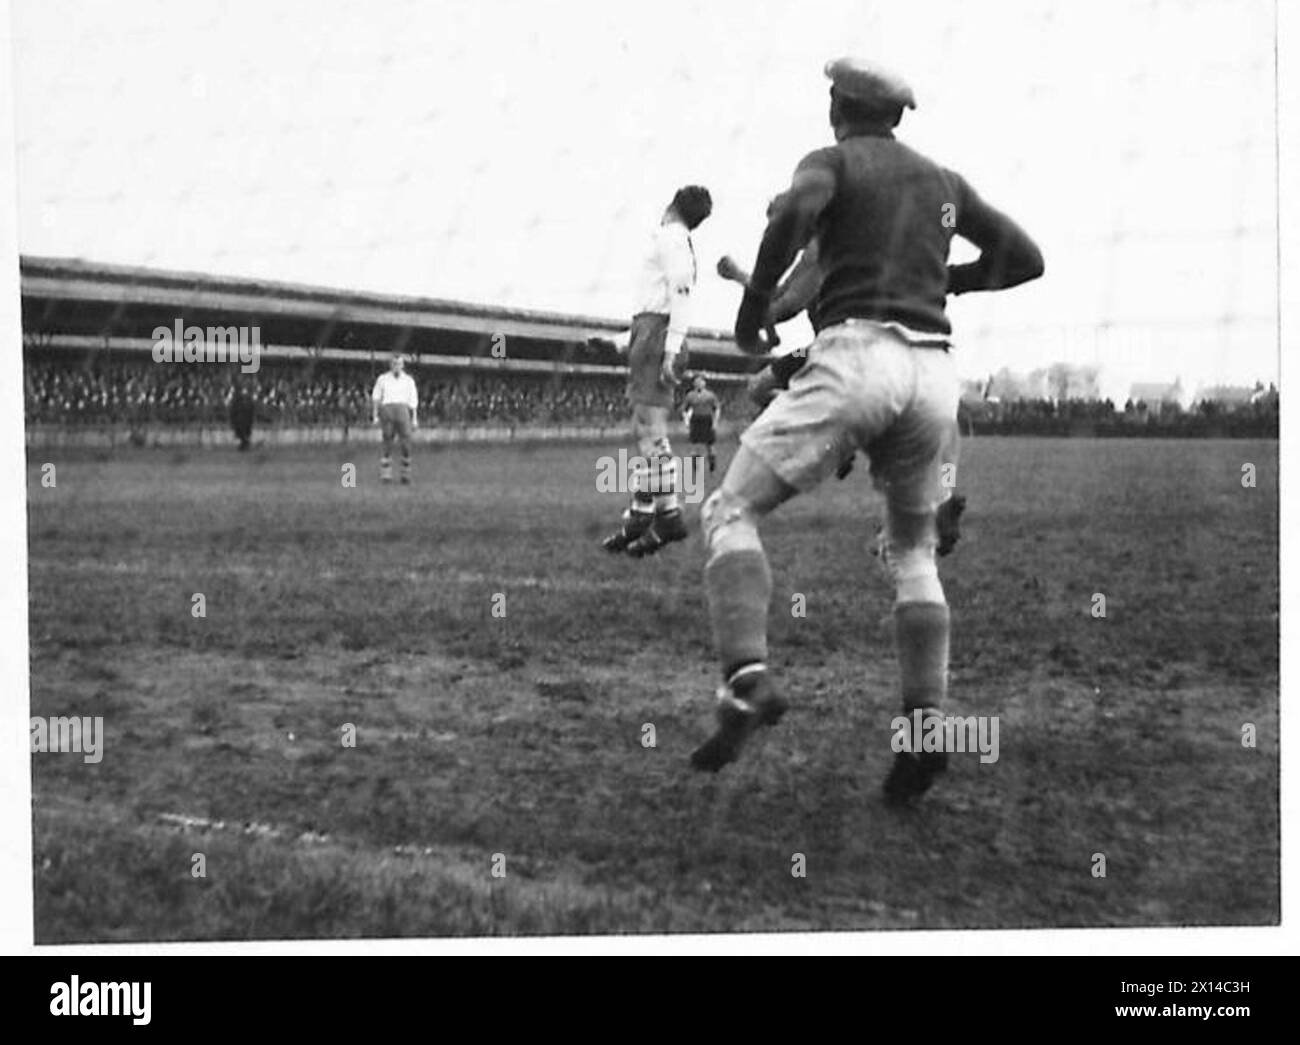 THE POLISH ARMY IN BRITAIN, 1940-1947 - Play around the Polish goal during a football game between teams representing Polish and Belgian armies. Photograph taken at Forfar. A special series of photographs dealing with the domestic and social life of troops of the 1st Polish Corps in Scotland where the officers and men are firmly established favourites with the local people. Some of the young soldiers were attending universities in Poland when war broke out. On arrival in Britain they joined the Polish Forces and continued their studies at the St Andrews University in order to finish their degr Stock Photo